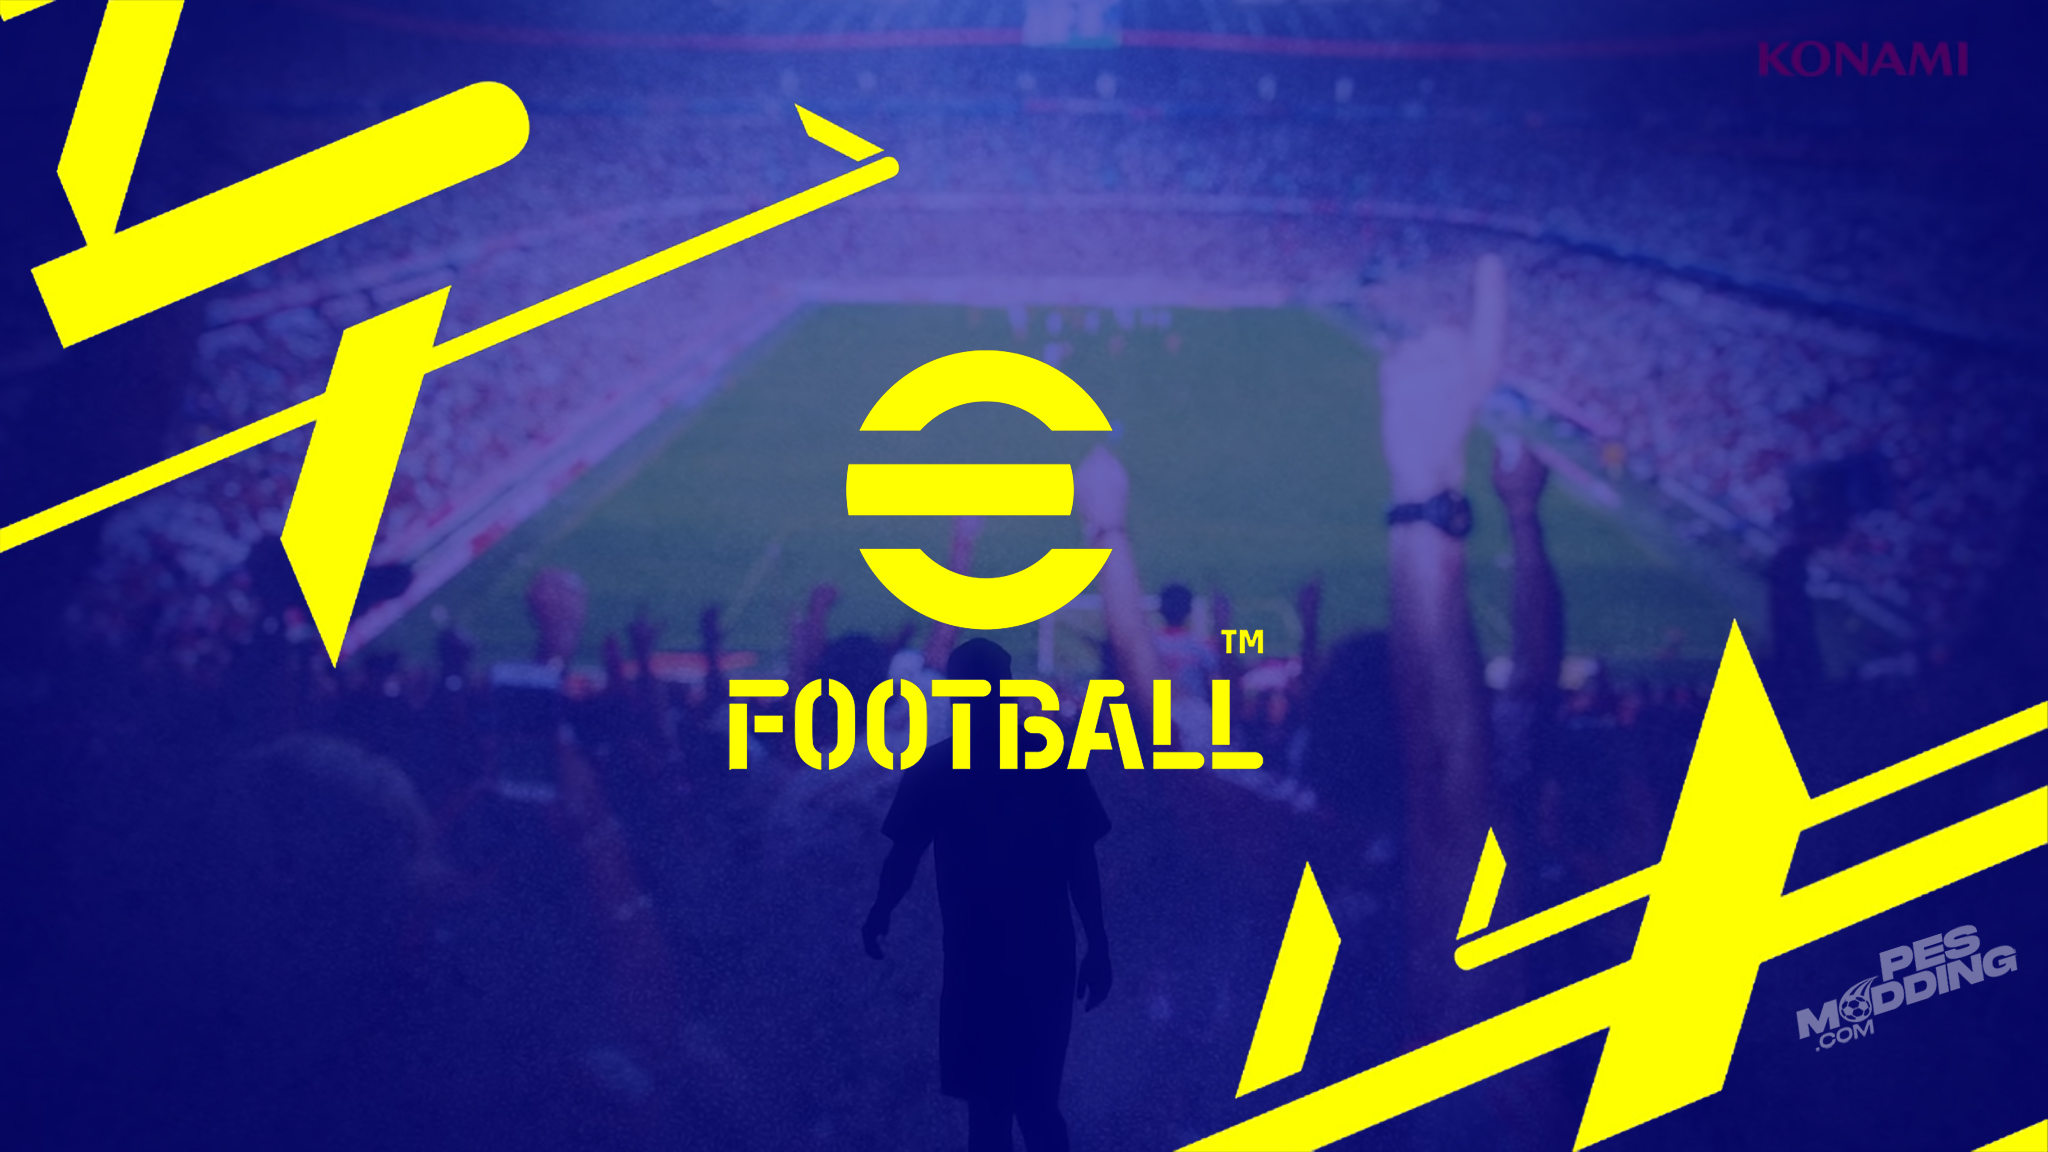 Efootball Mobile 2023 Wallpapers - Wallpaper Cave